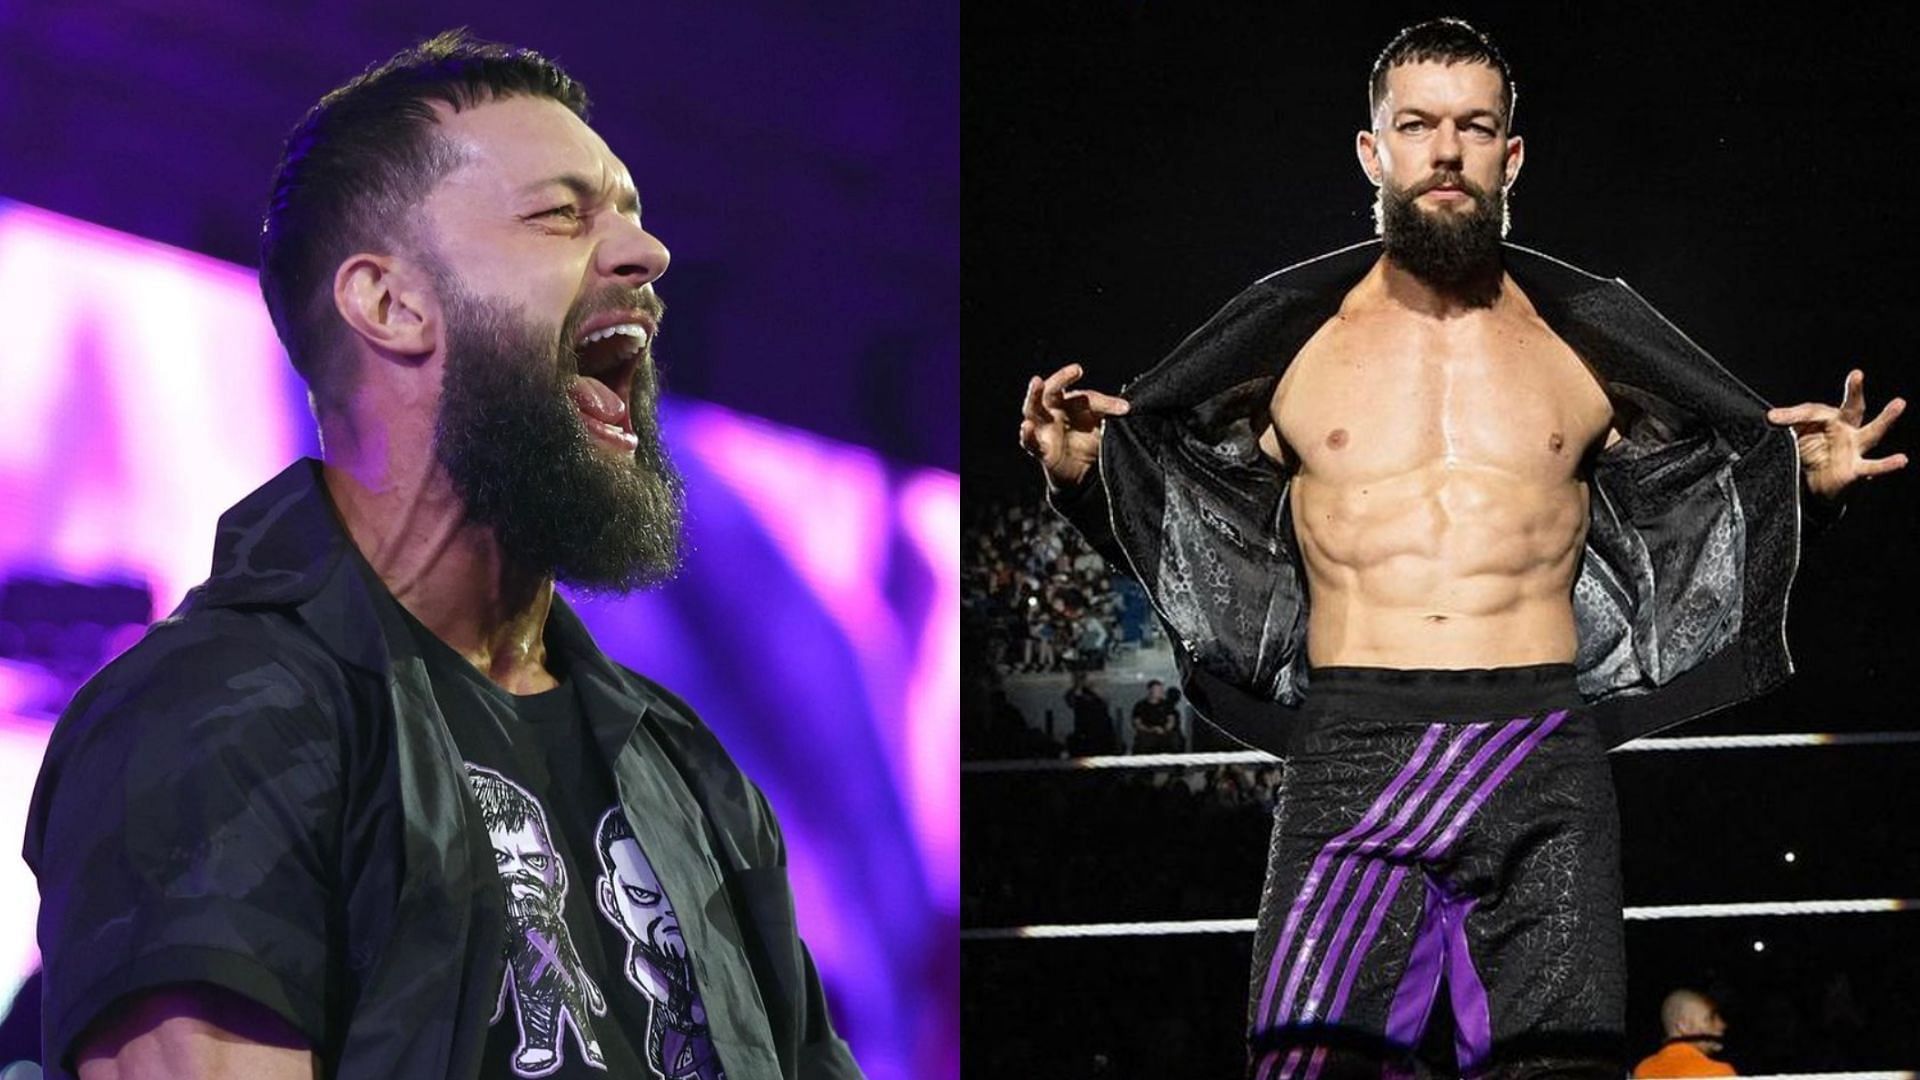 Finn Balor is a member of The Judgment Day faction. 